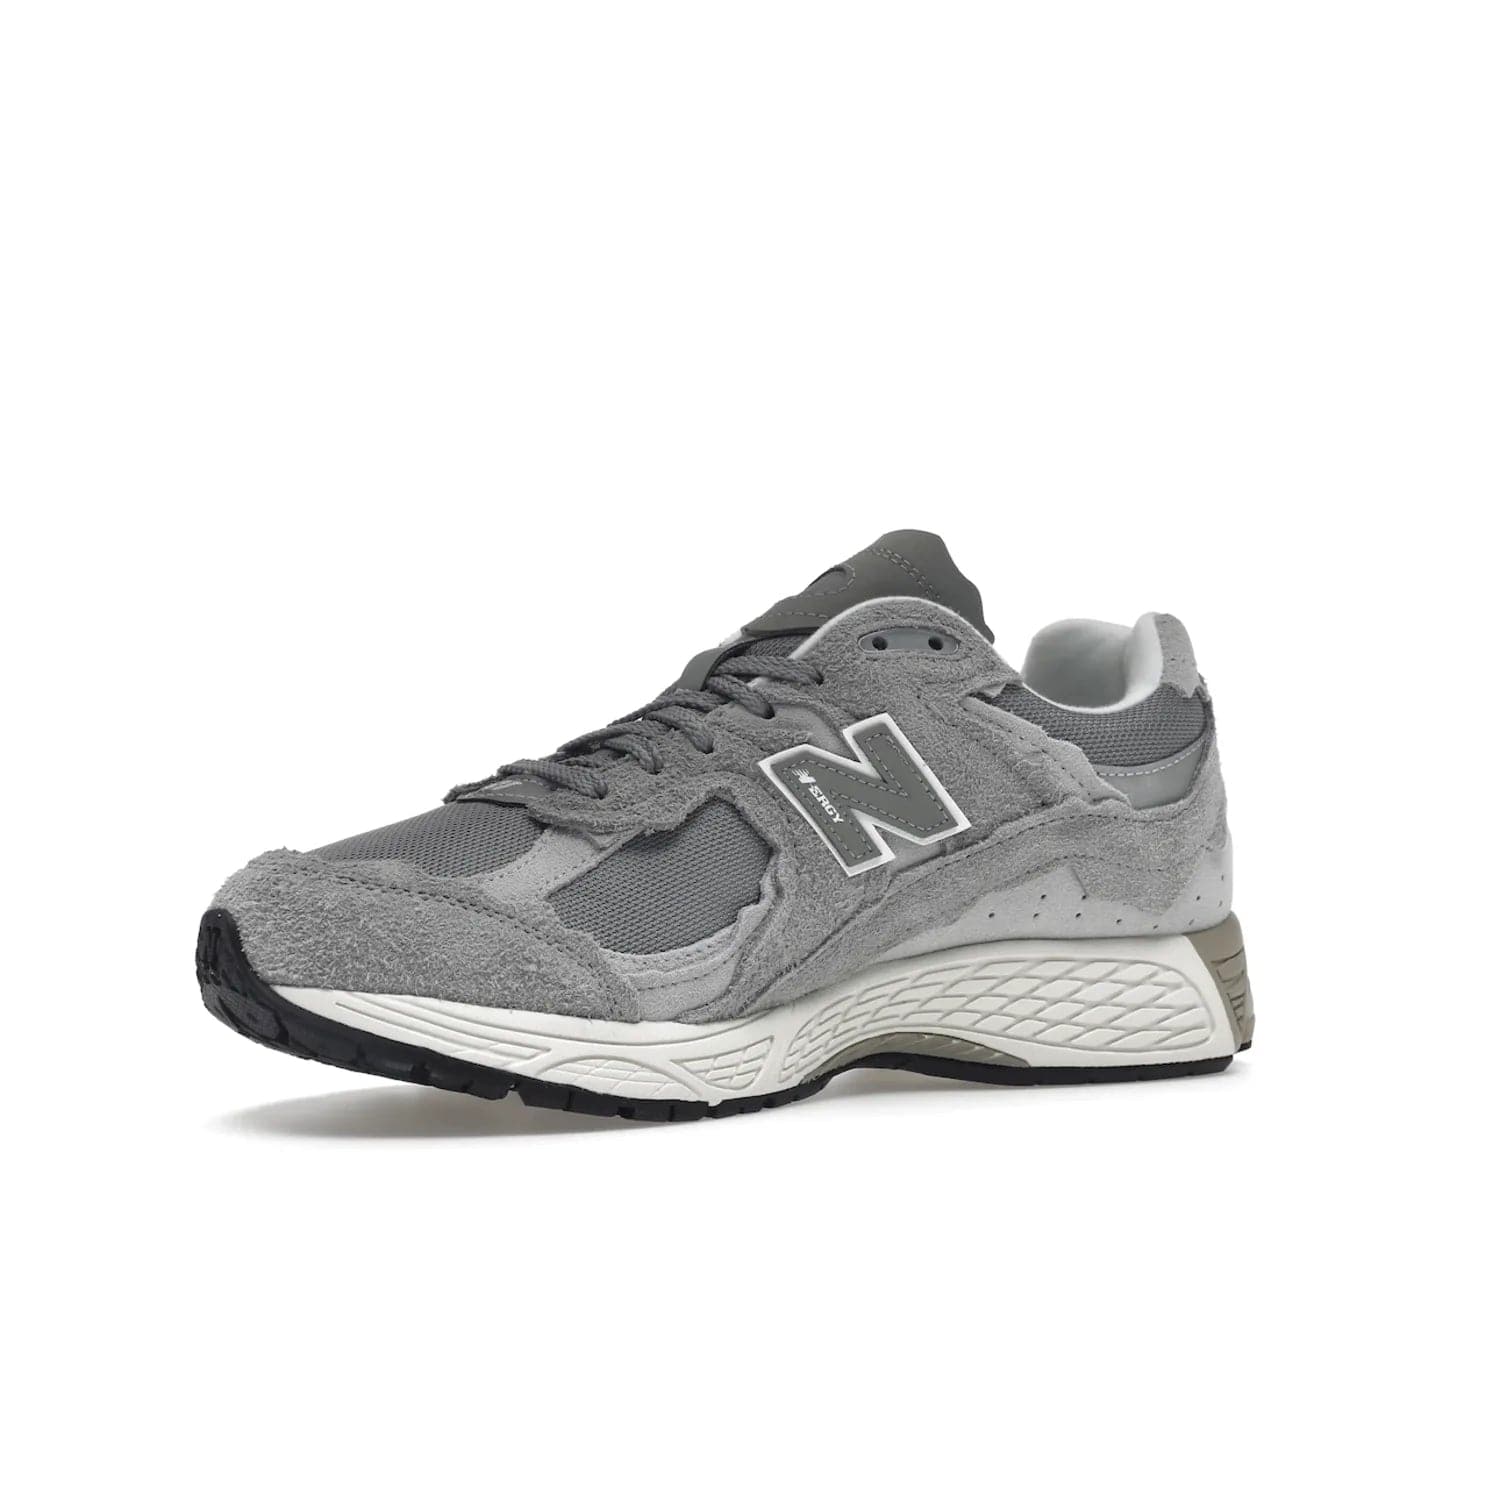 New Balance 2002R Protection Pack Grey - Image 16 - Only at www.BallersClubKickz.com - The New Balance 2002R Protection Pack Grey provides superior protection and all-day comfort. It features a blend of synthetic and mesh materials, foam midsole, rubber outsole, and a toe cap and heel counter. Show off the classic "N" logo and "2002R" lettering. Get a pair on February 14, 2023 for protection and style.